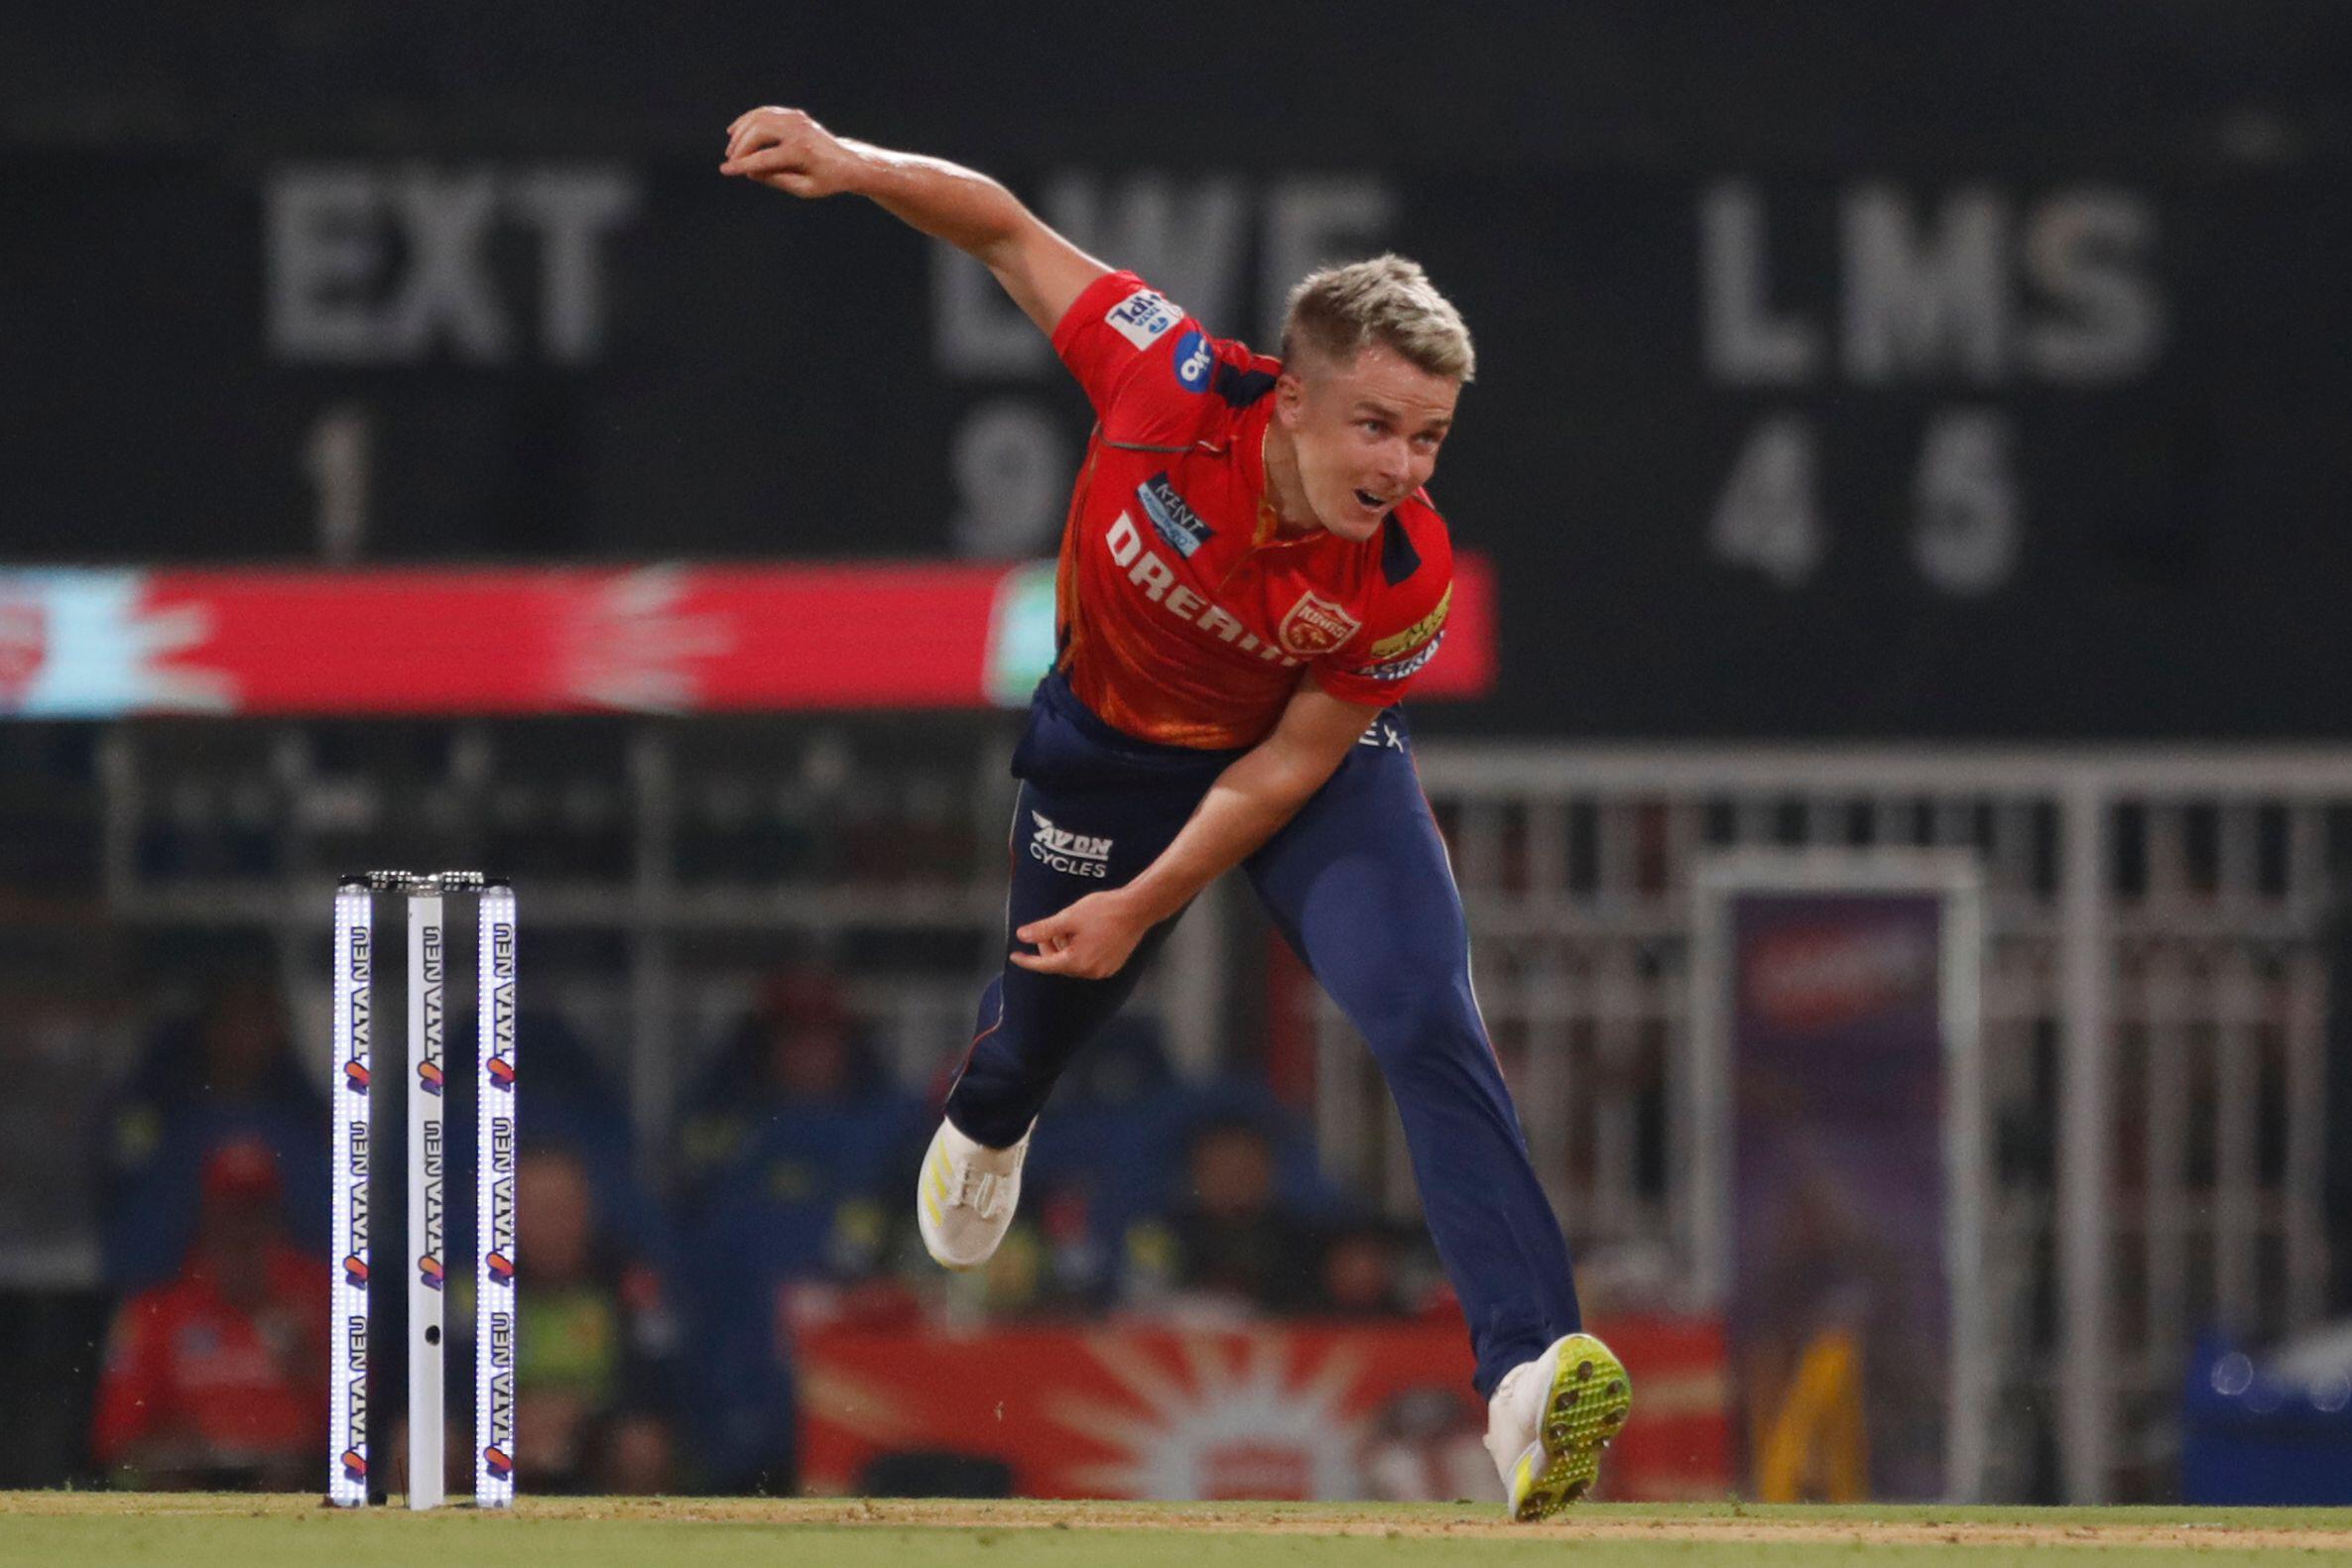 Sam Curran & Jonny Bairstow to depart from IPL for T20 World Cup, to